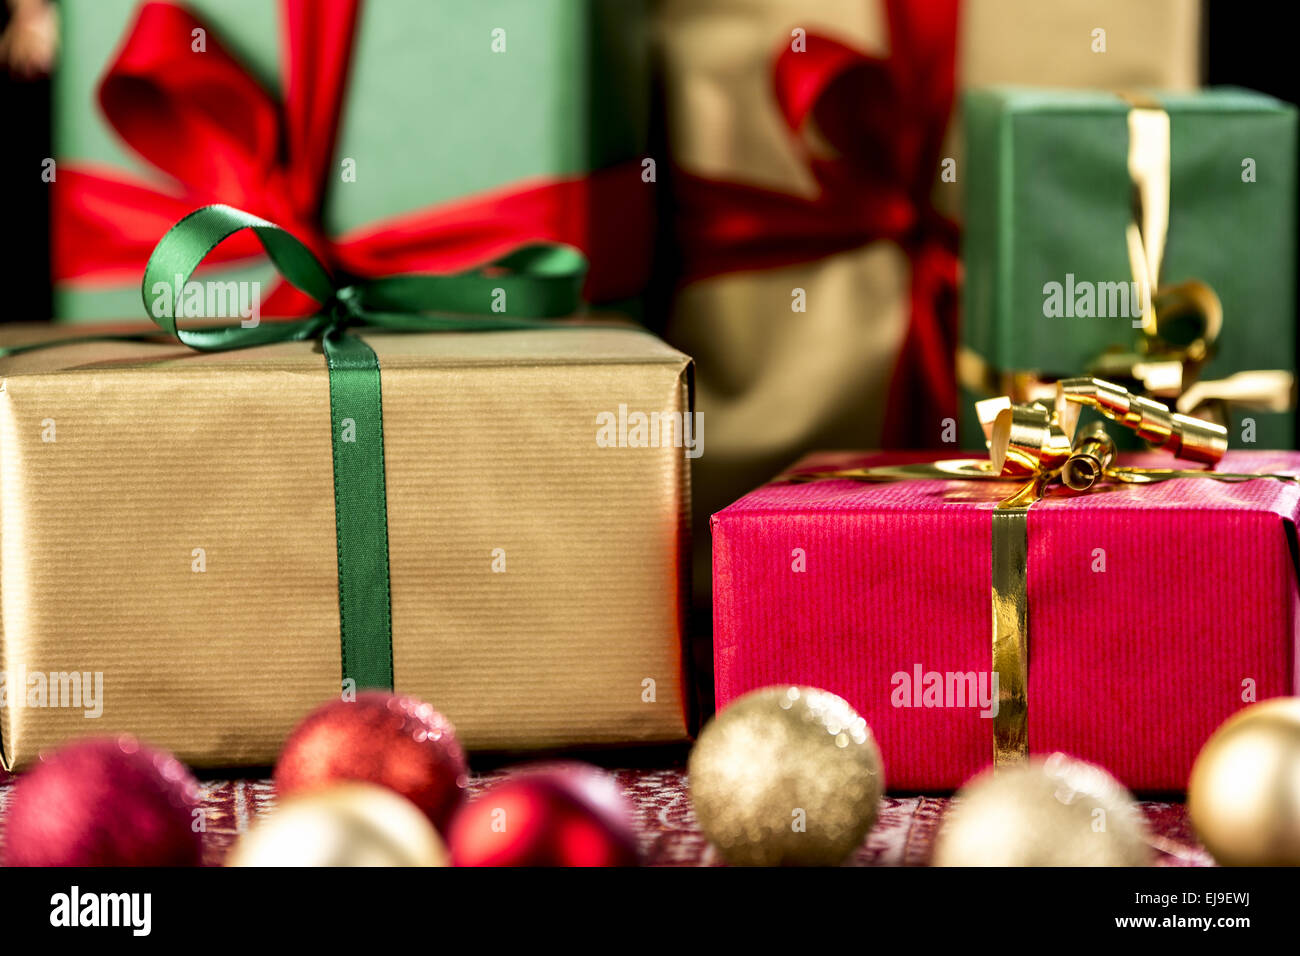 Xmas Gifts in Red, Green and Gold Stock Photo